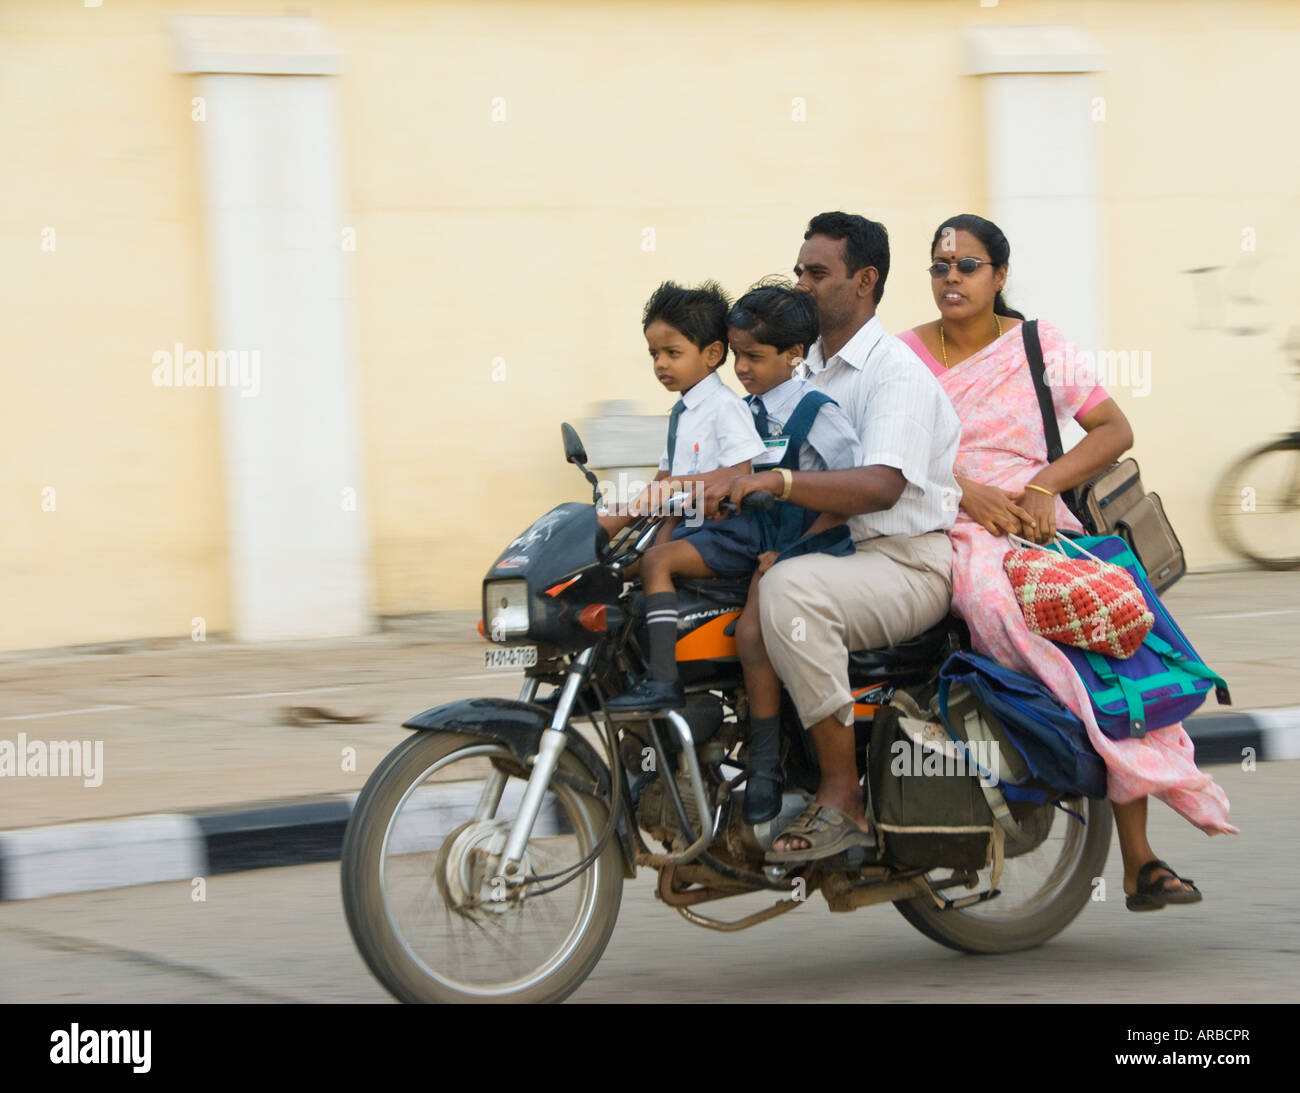 An Indian family on a motorbike in India. Ratan Tata has said seeing whole famiies on one bike was his inspiration for the Nano Stock Photo